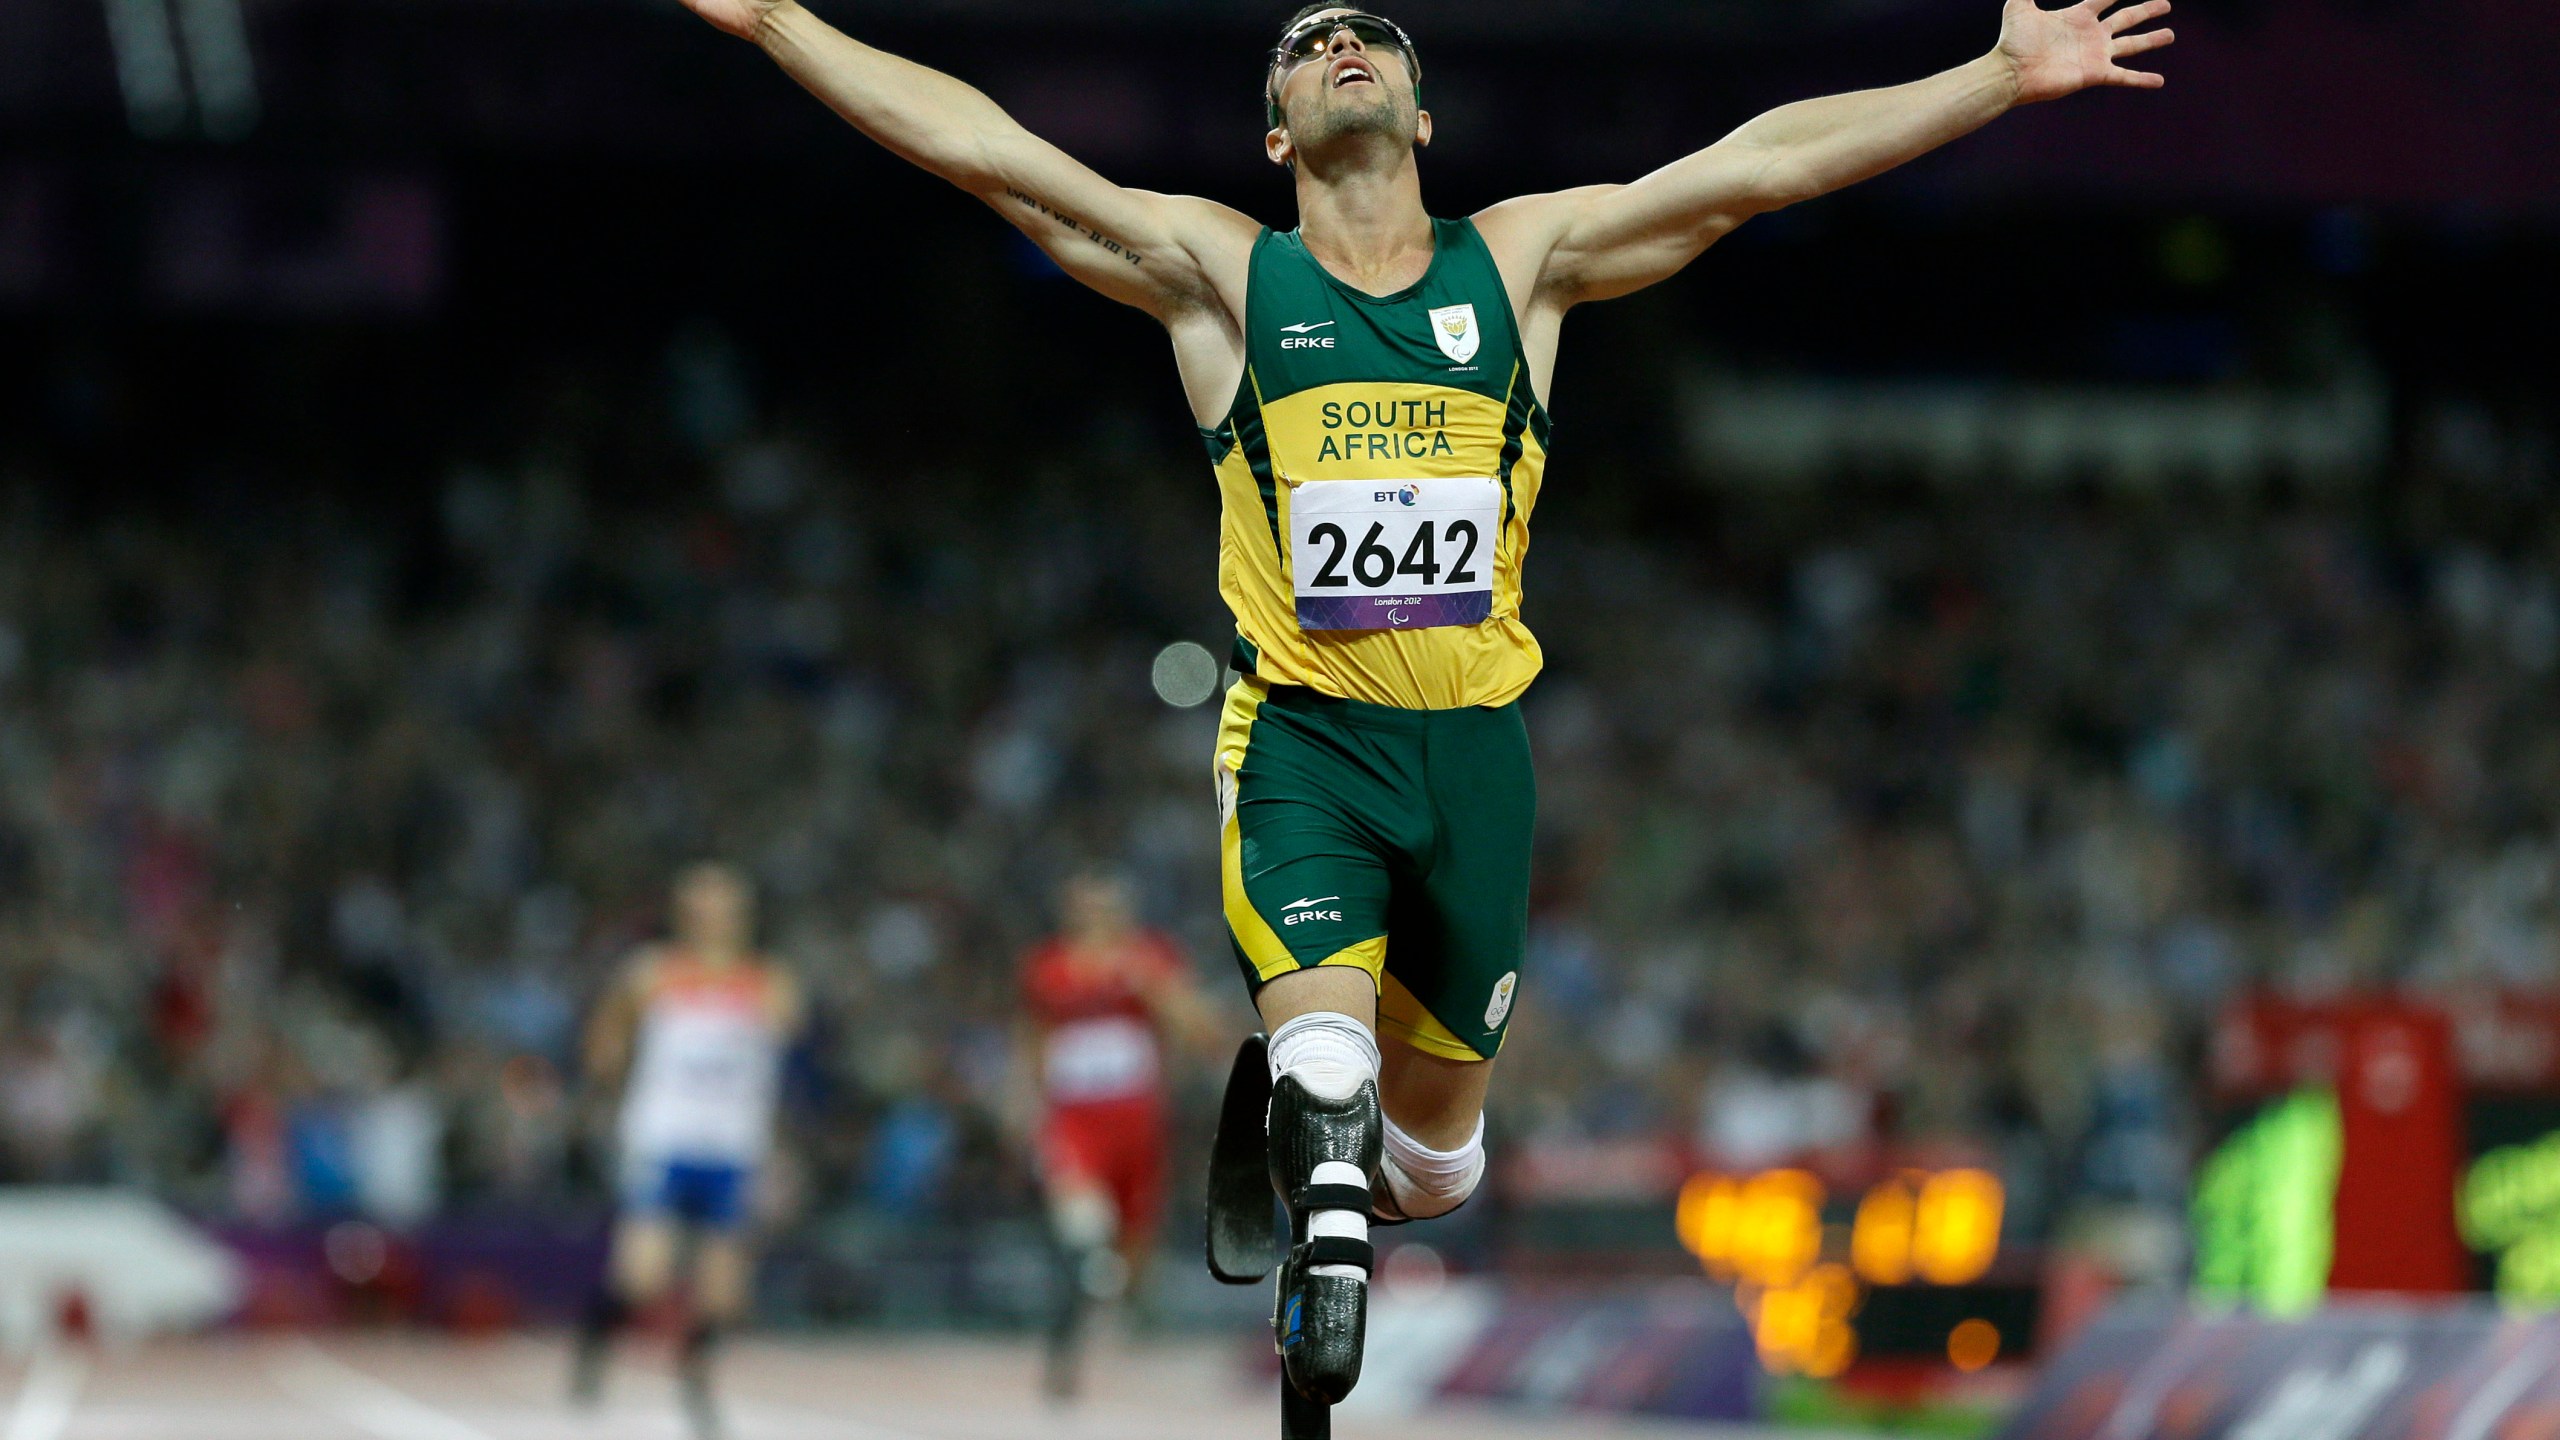 FILE - South Africa's Oscar Pistorius wins gold in the men's 400-meter T44 final at the 2012 Paralympics in London on Sept. 8, 2012. Oscar Pistorius is due on Friday, Jan. 5, 2024 to be released from prison on parole to live under strict conditions at a family home after serving nearly nine years of his murder sentence for the shooting death of girlfriend Reeva Steenkamp on Valentine’s Day 2013. (AP Photo/Kirsty Wigglesworth, File)